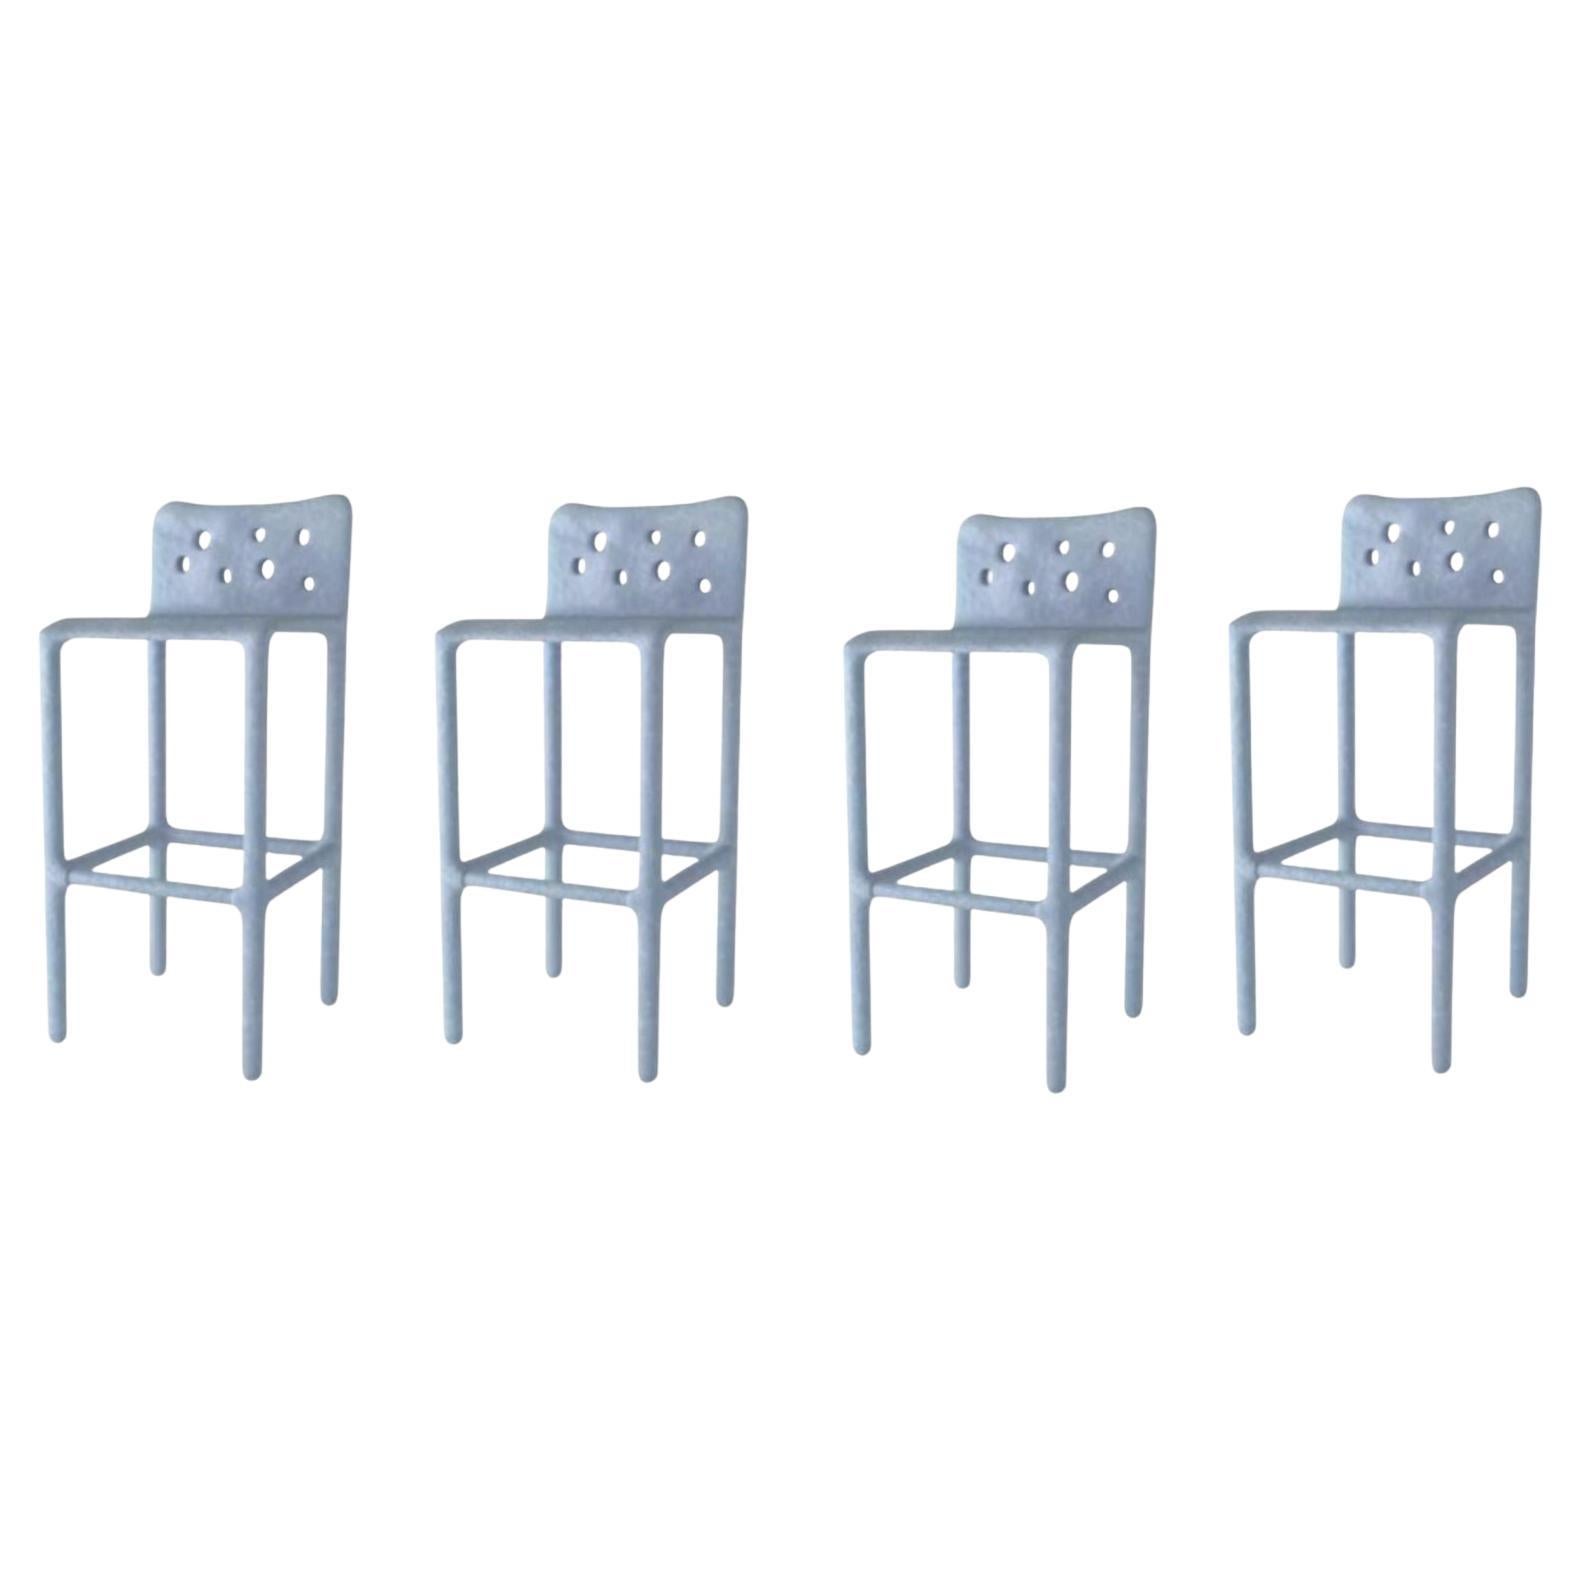 Set of 4 Sky Blue Sculpted Contemporary Chairs by Faina For Sale